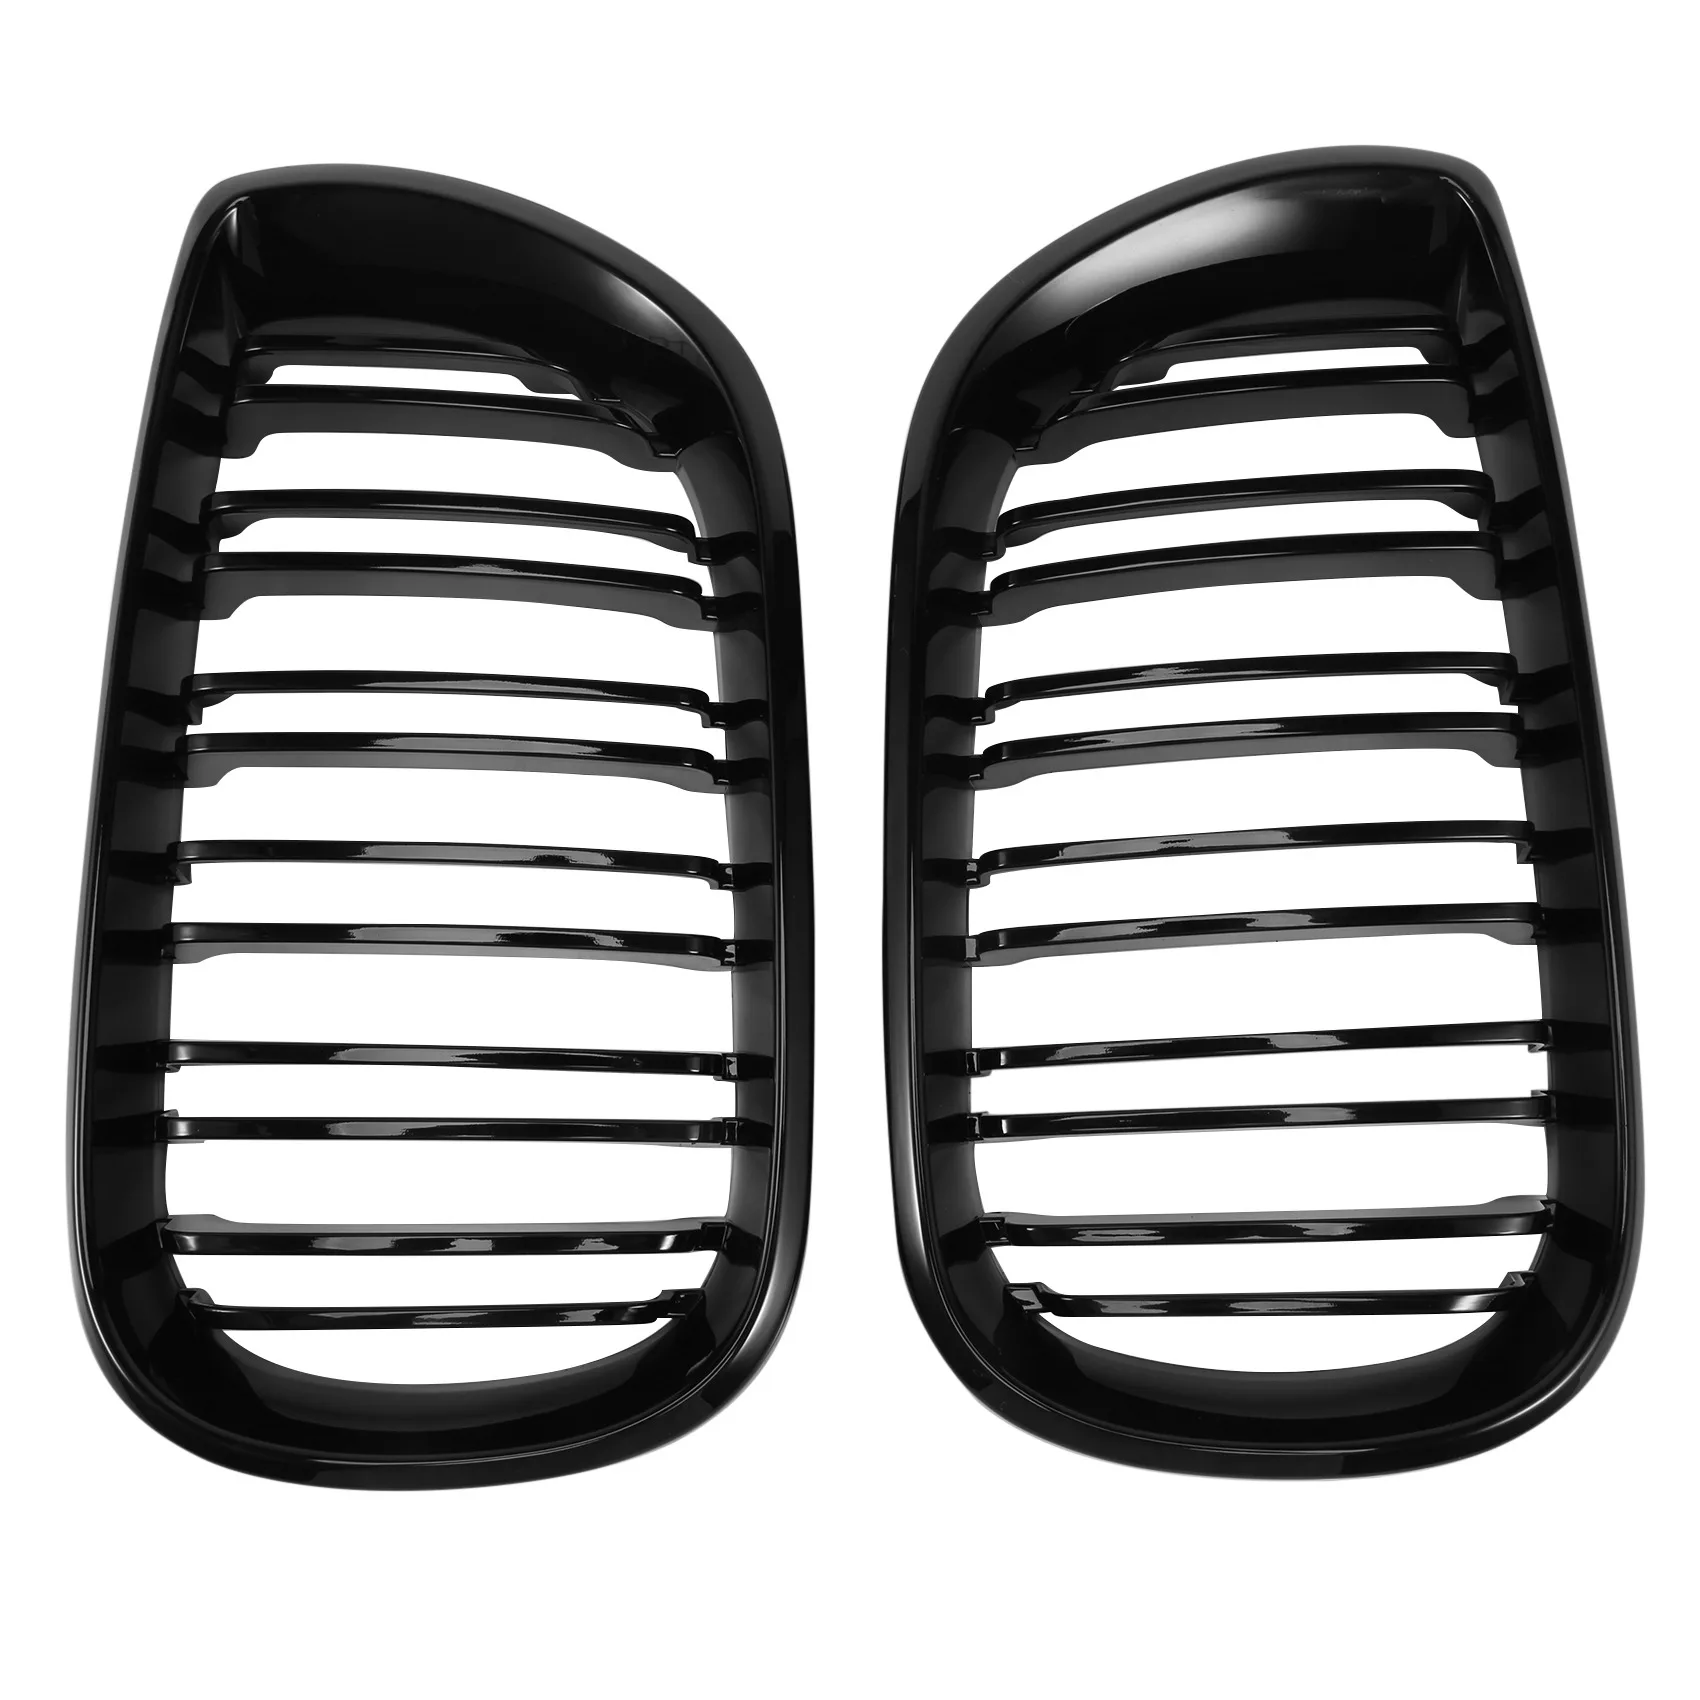 

2Pcs Car Style Gloss Black Front Kidney Double Slat Grill Grille for BMW E46 4 Door 4D 3 Series 2002-2005